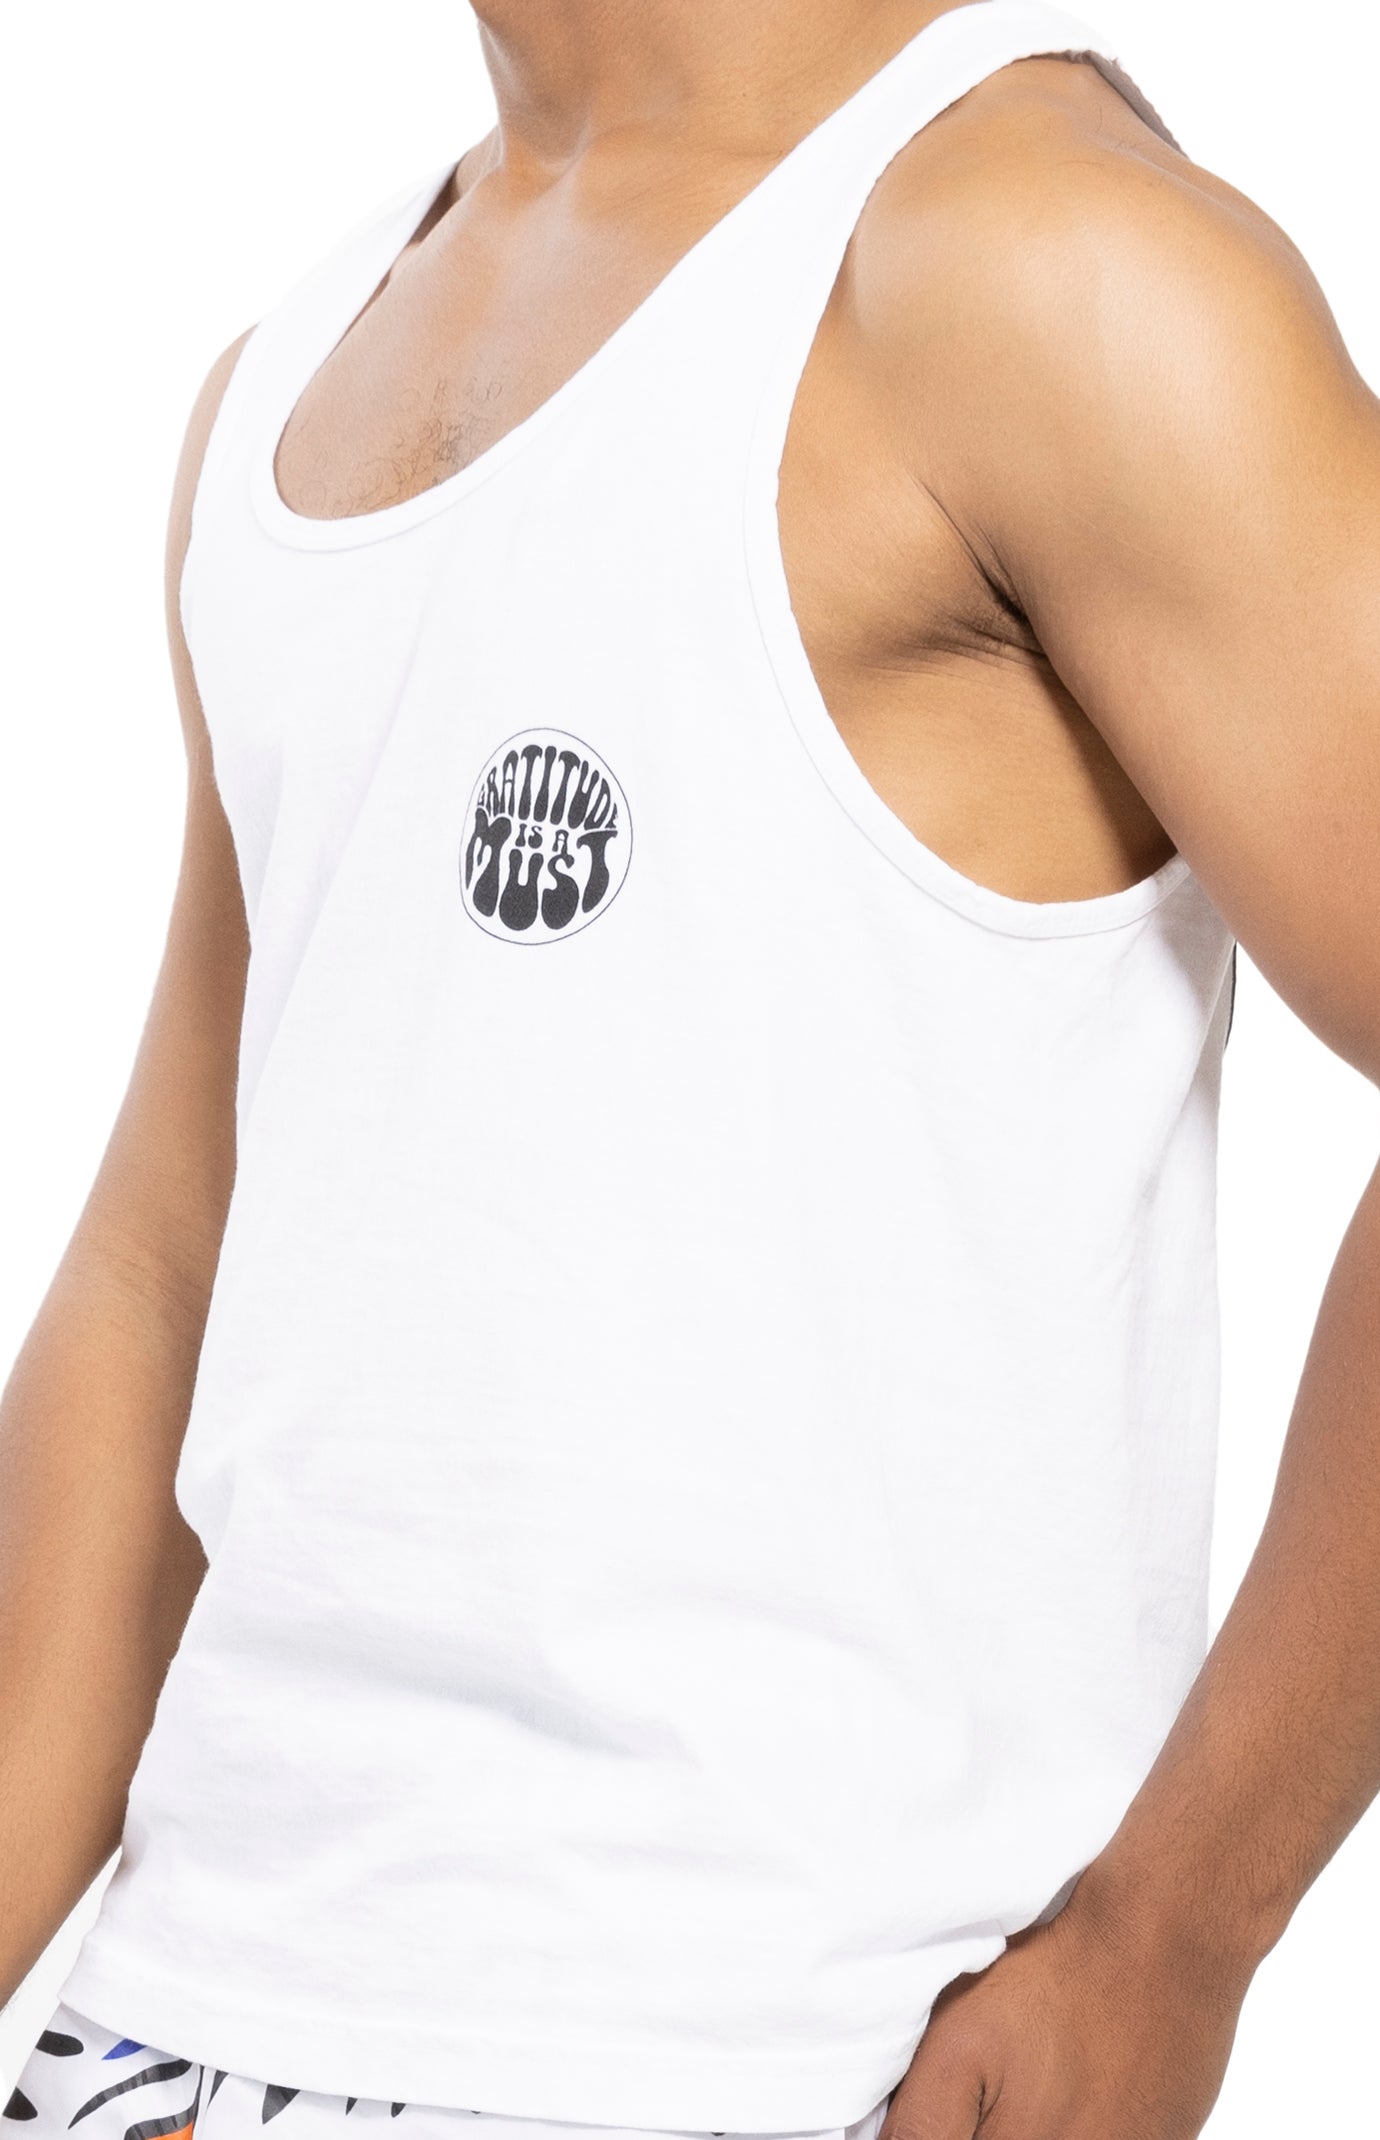 GRATITUDE IS A MUST TANK TOP WHITE